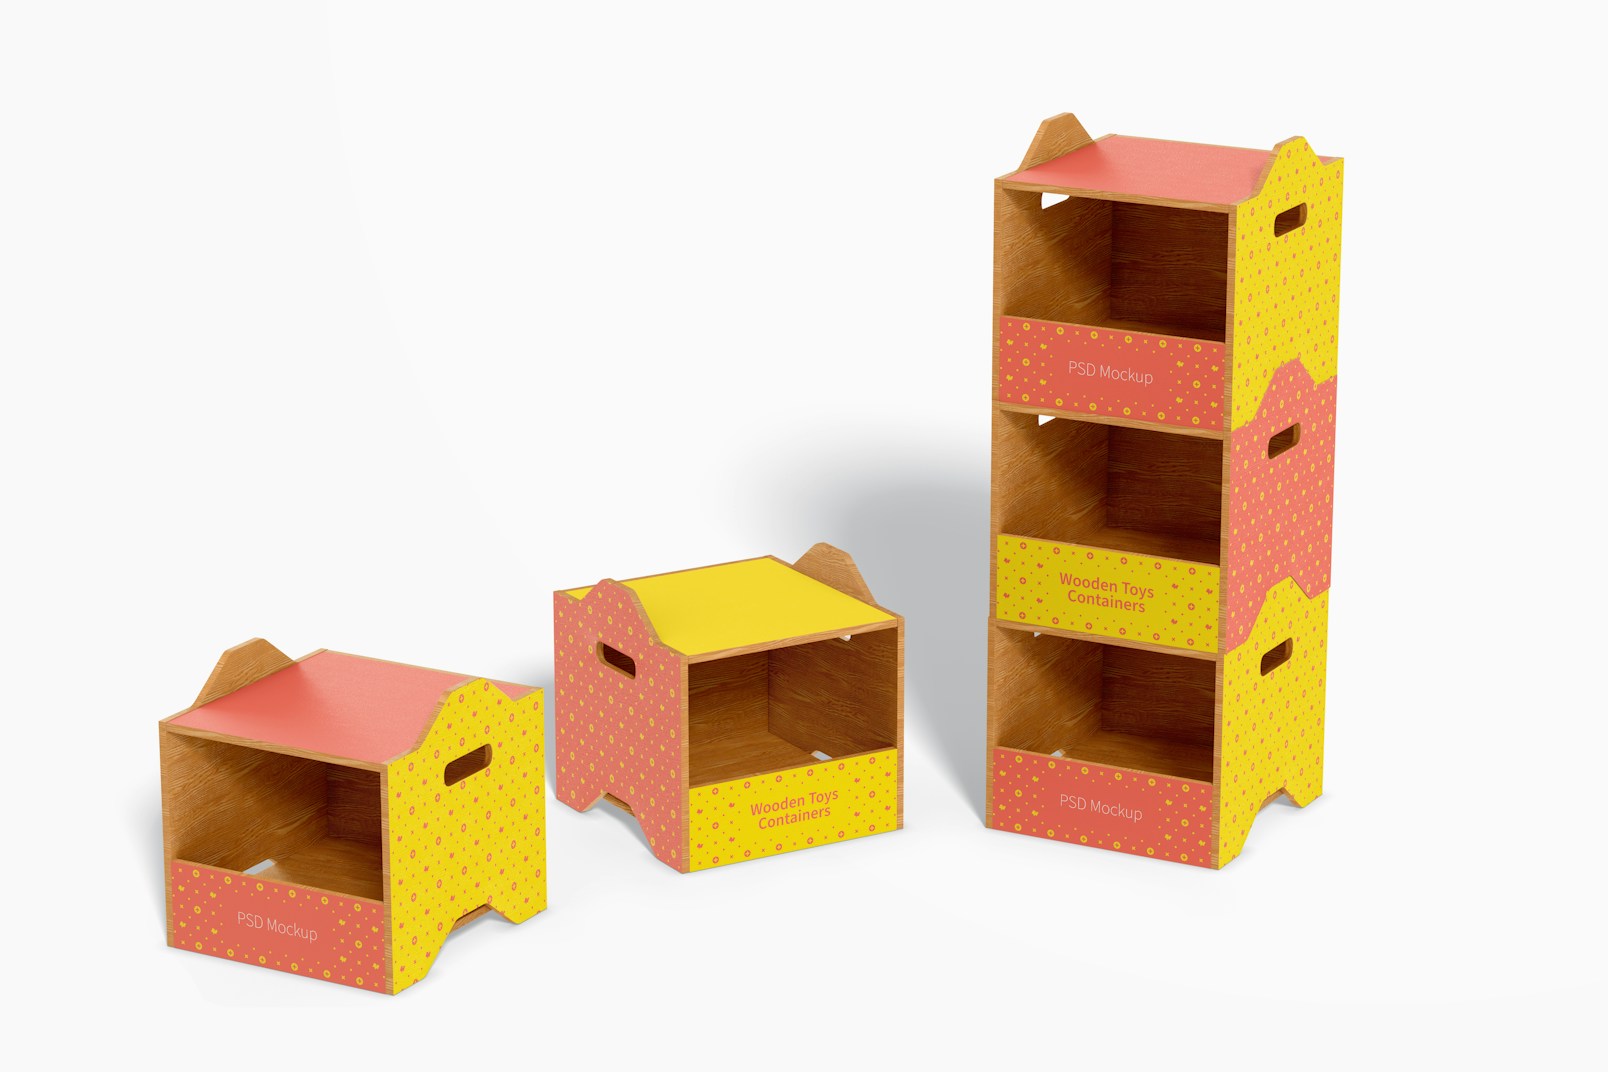 Wooden Toys Containers Mockup, Stacked